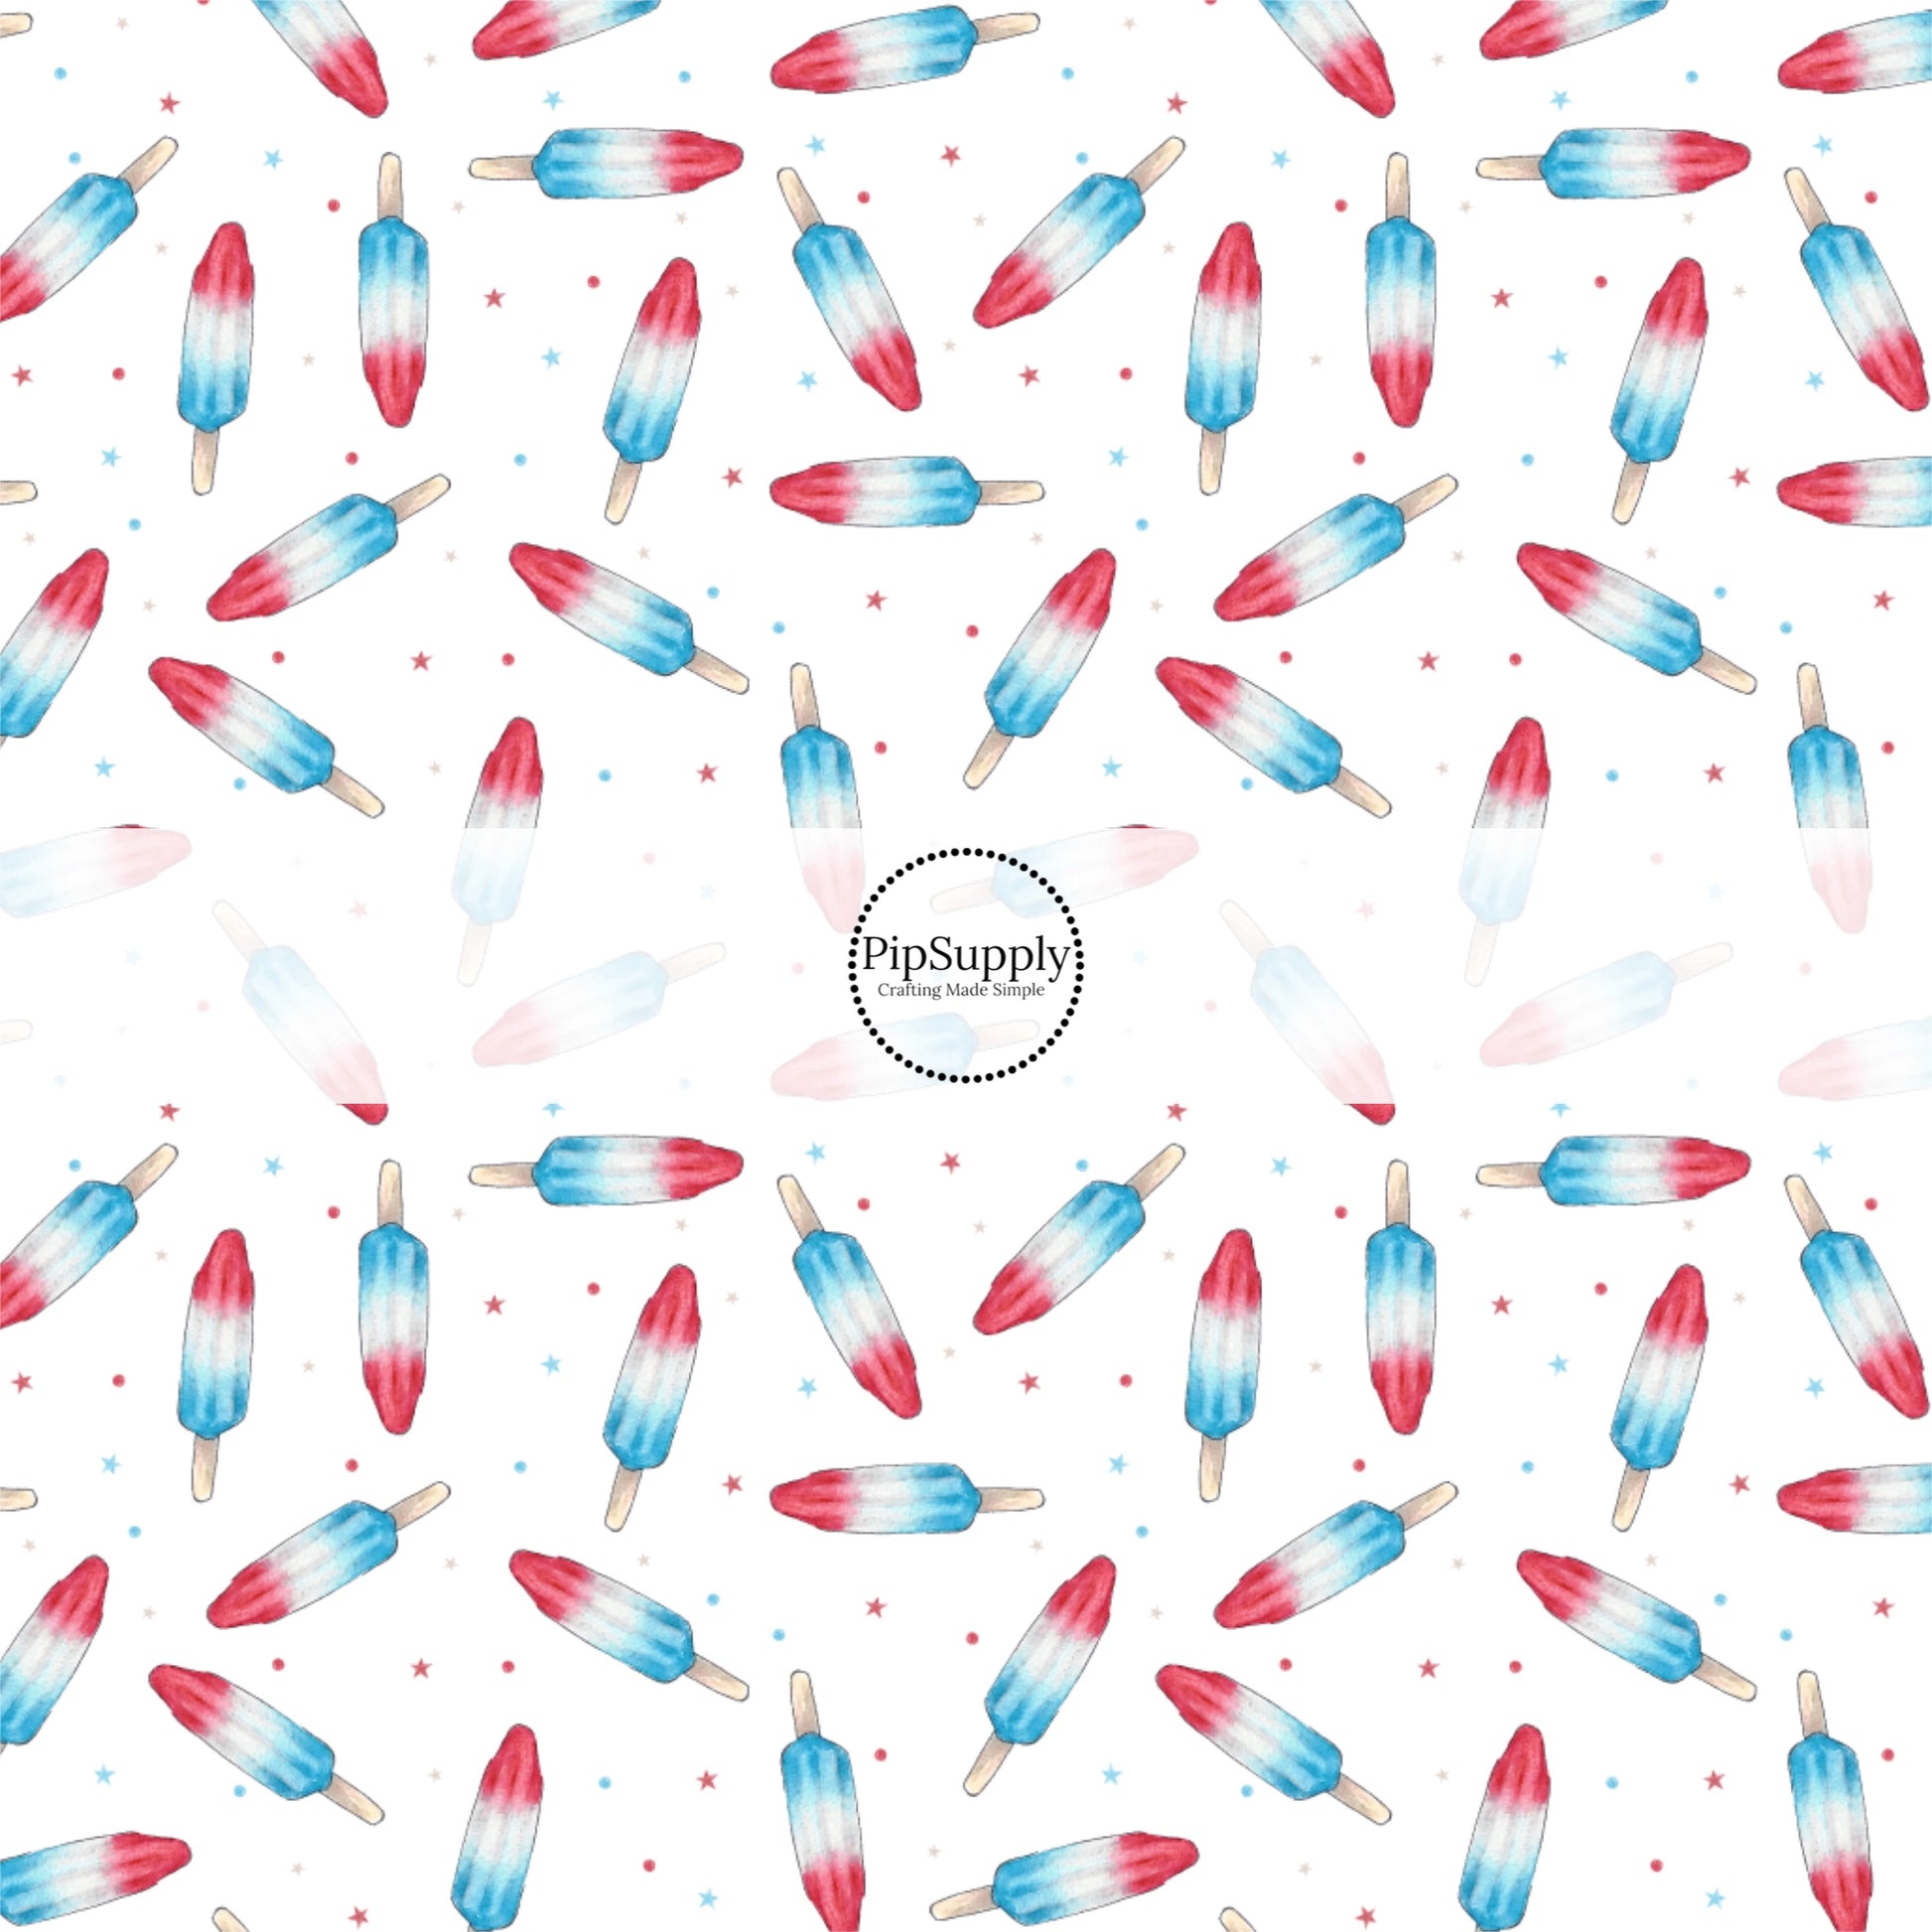 Bright Blue, White and Red Popsicle Fabric by the Yard -Patriotic Rocket Pop - With tiny stars